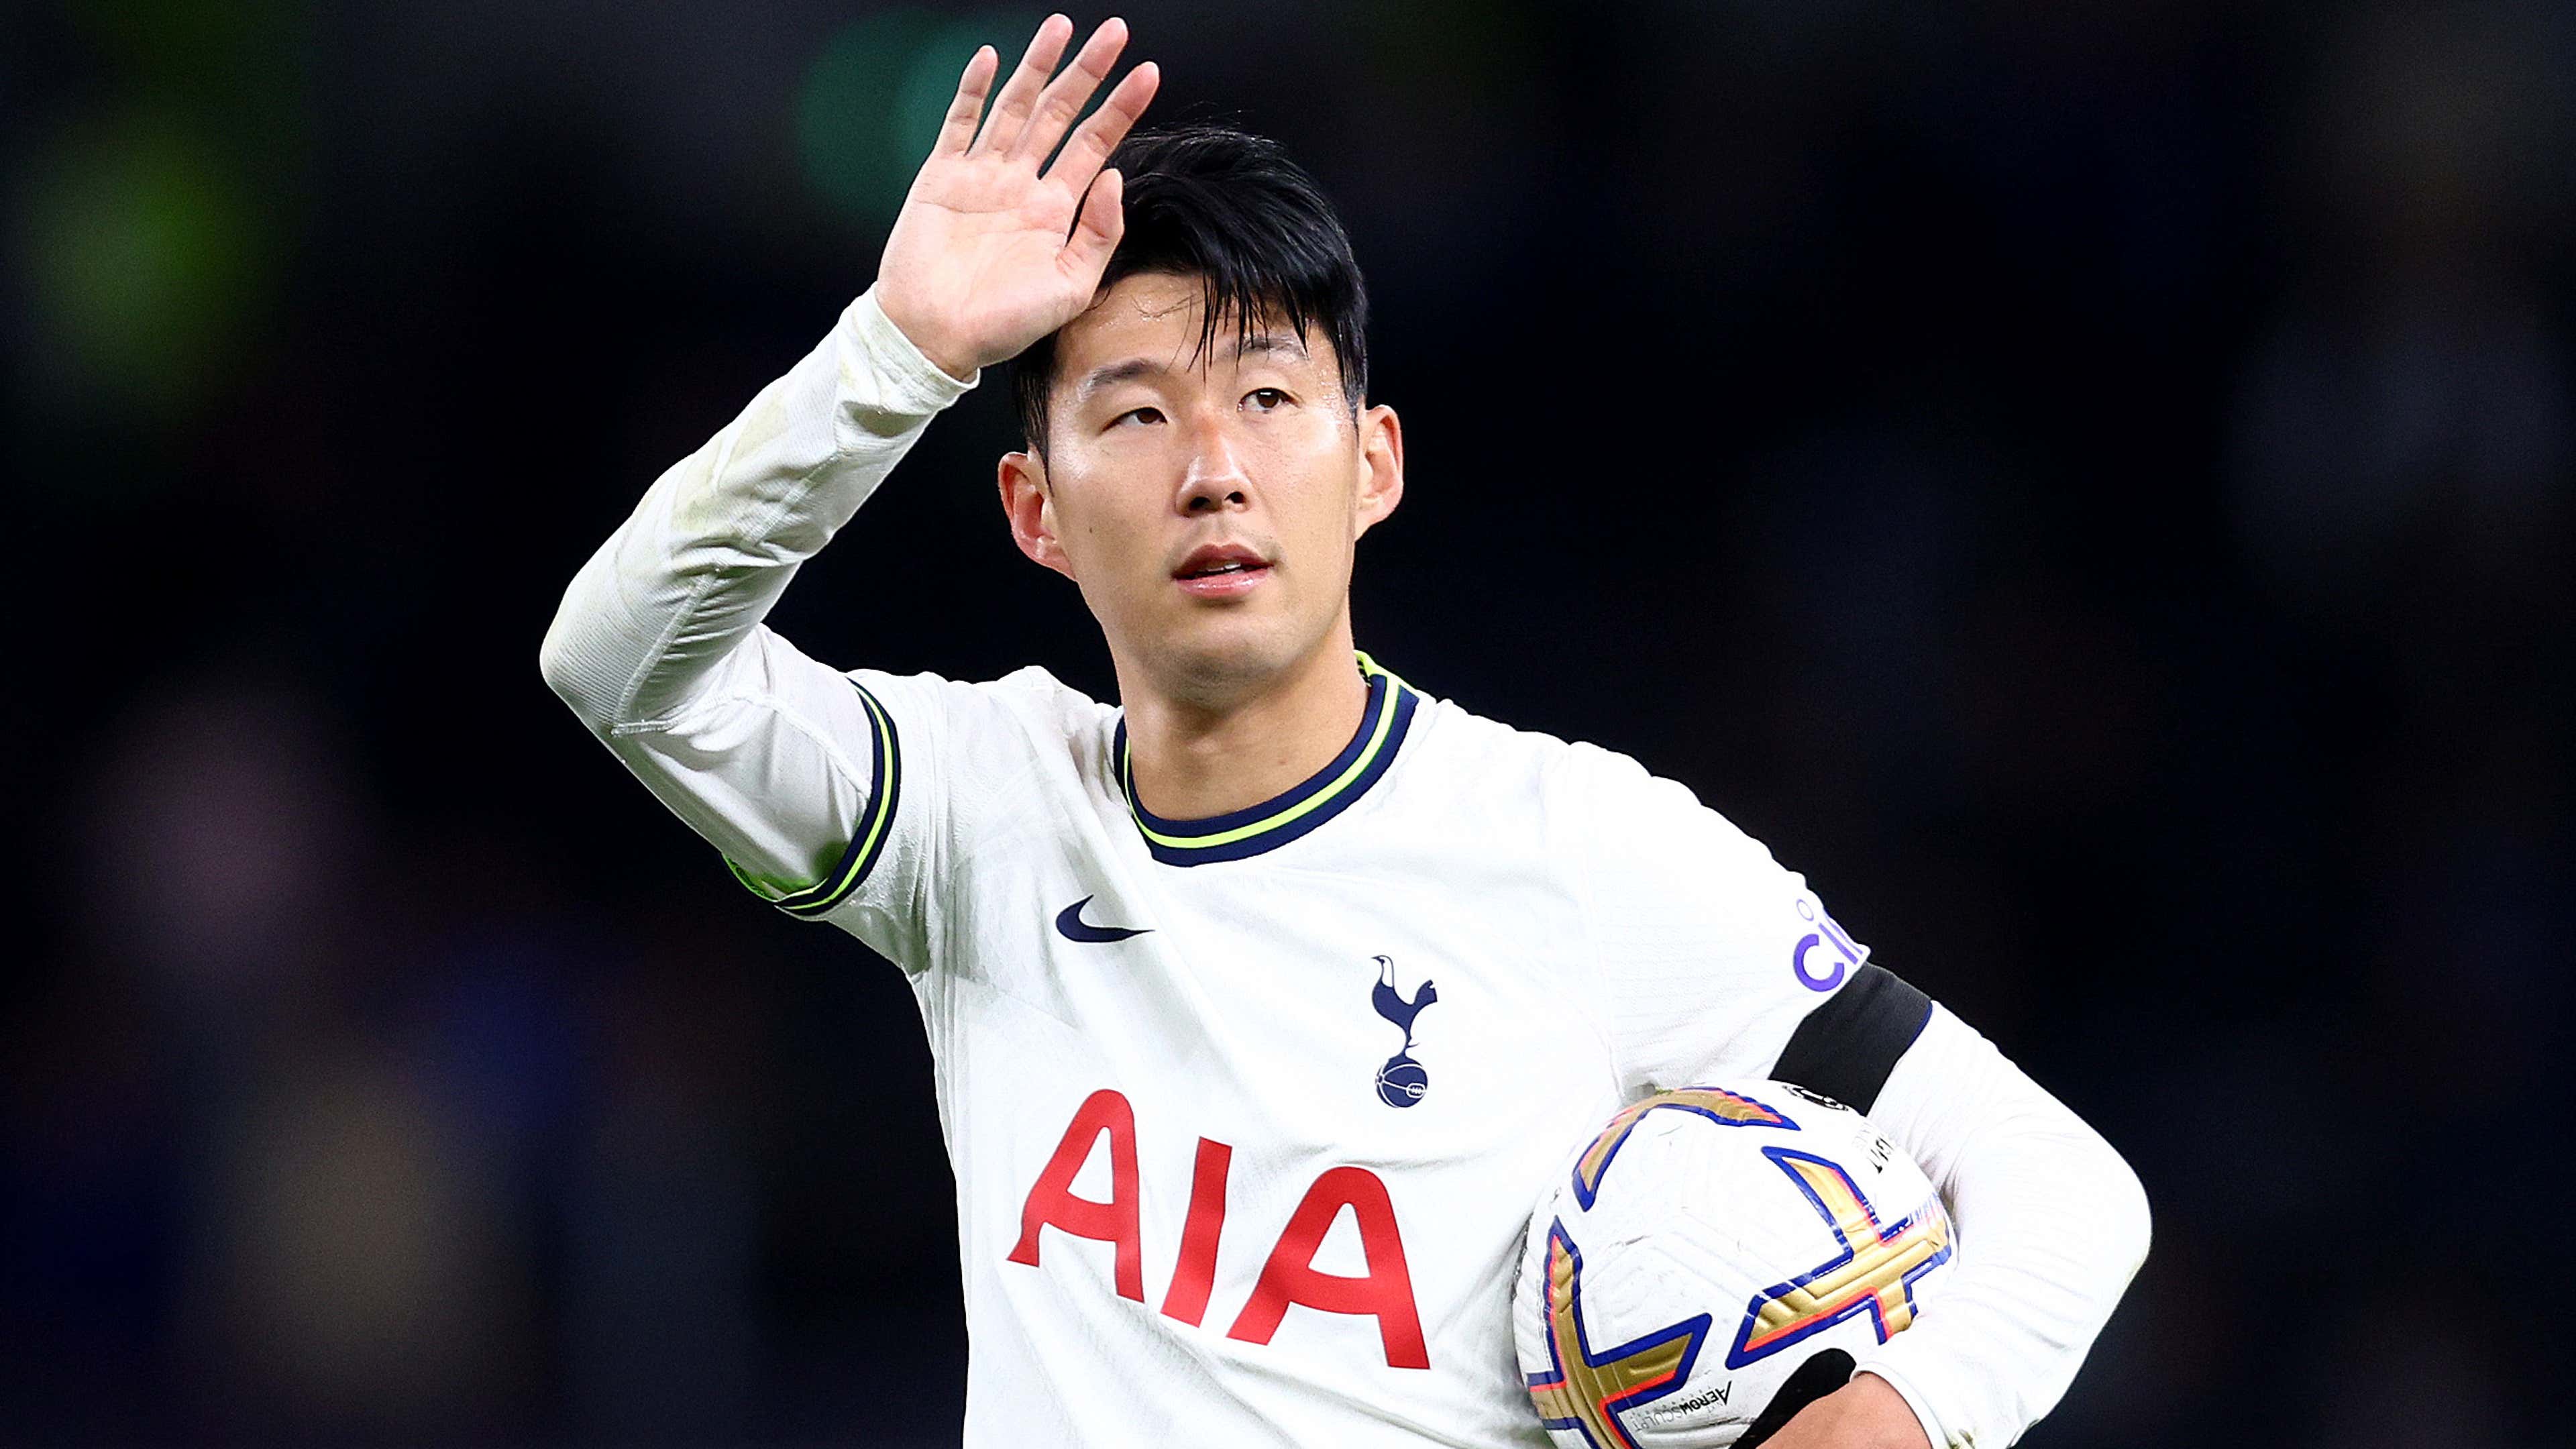 AIA - Tottenham Hotspur's performance has been remarkable this season,  coming in 2nd at the English Premier League so far! Who has been your  favourite player - Harry Kane, Heung-Min Son or